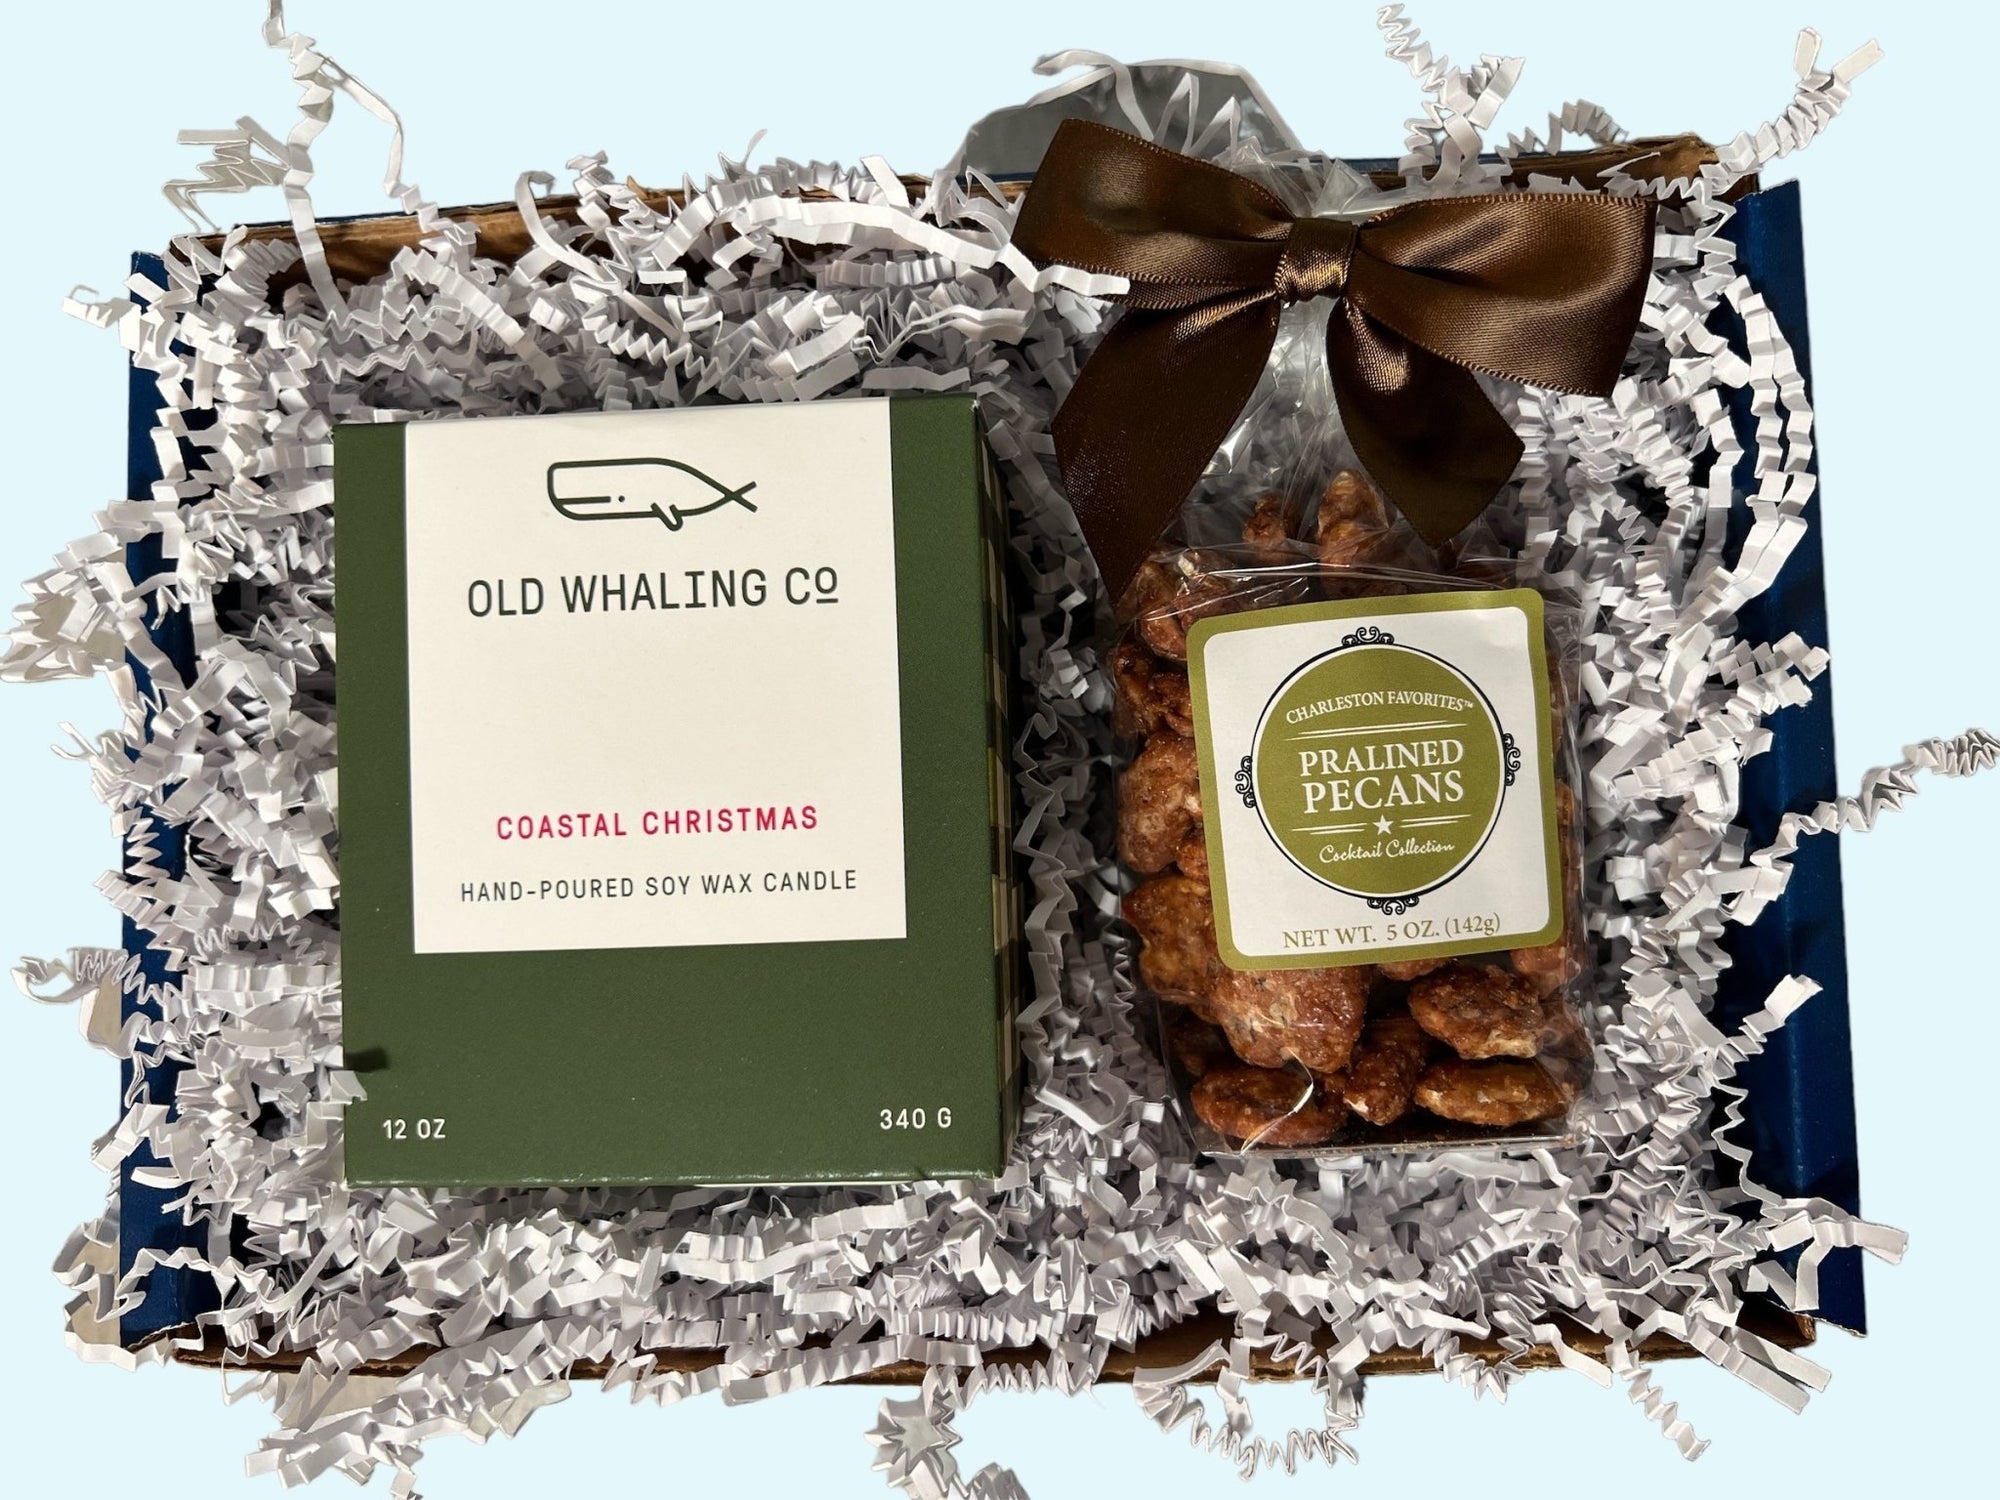 Perfect Pair: Old Whaling Co Coastal Christmas Candle + Charleston Favorites Pralined Pecans - Essentially Charleston